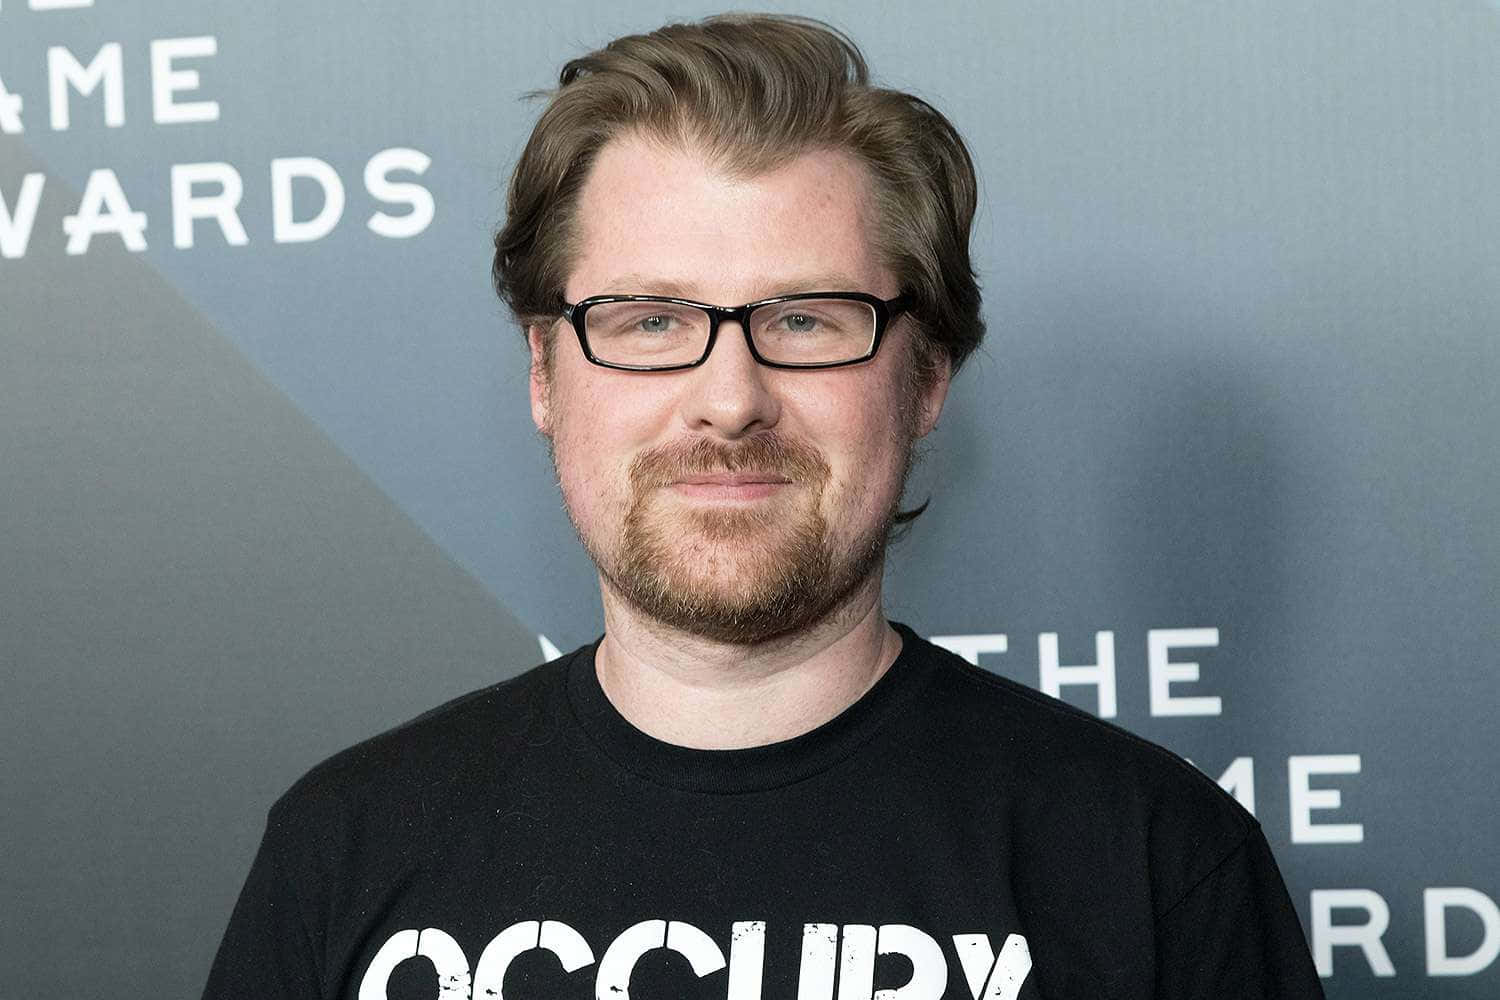 Caption: Justin Roiland at an event Wallpaper